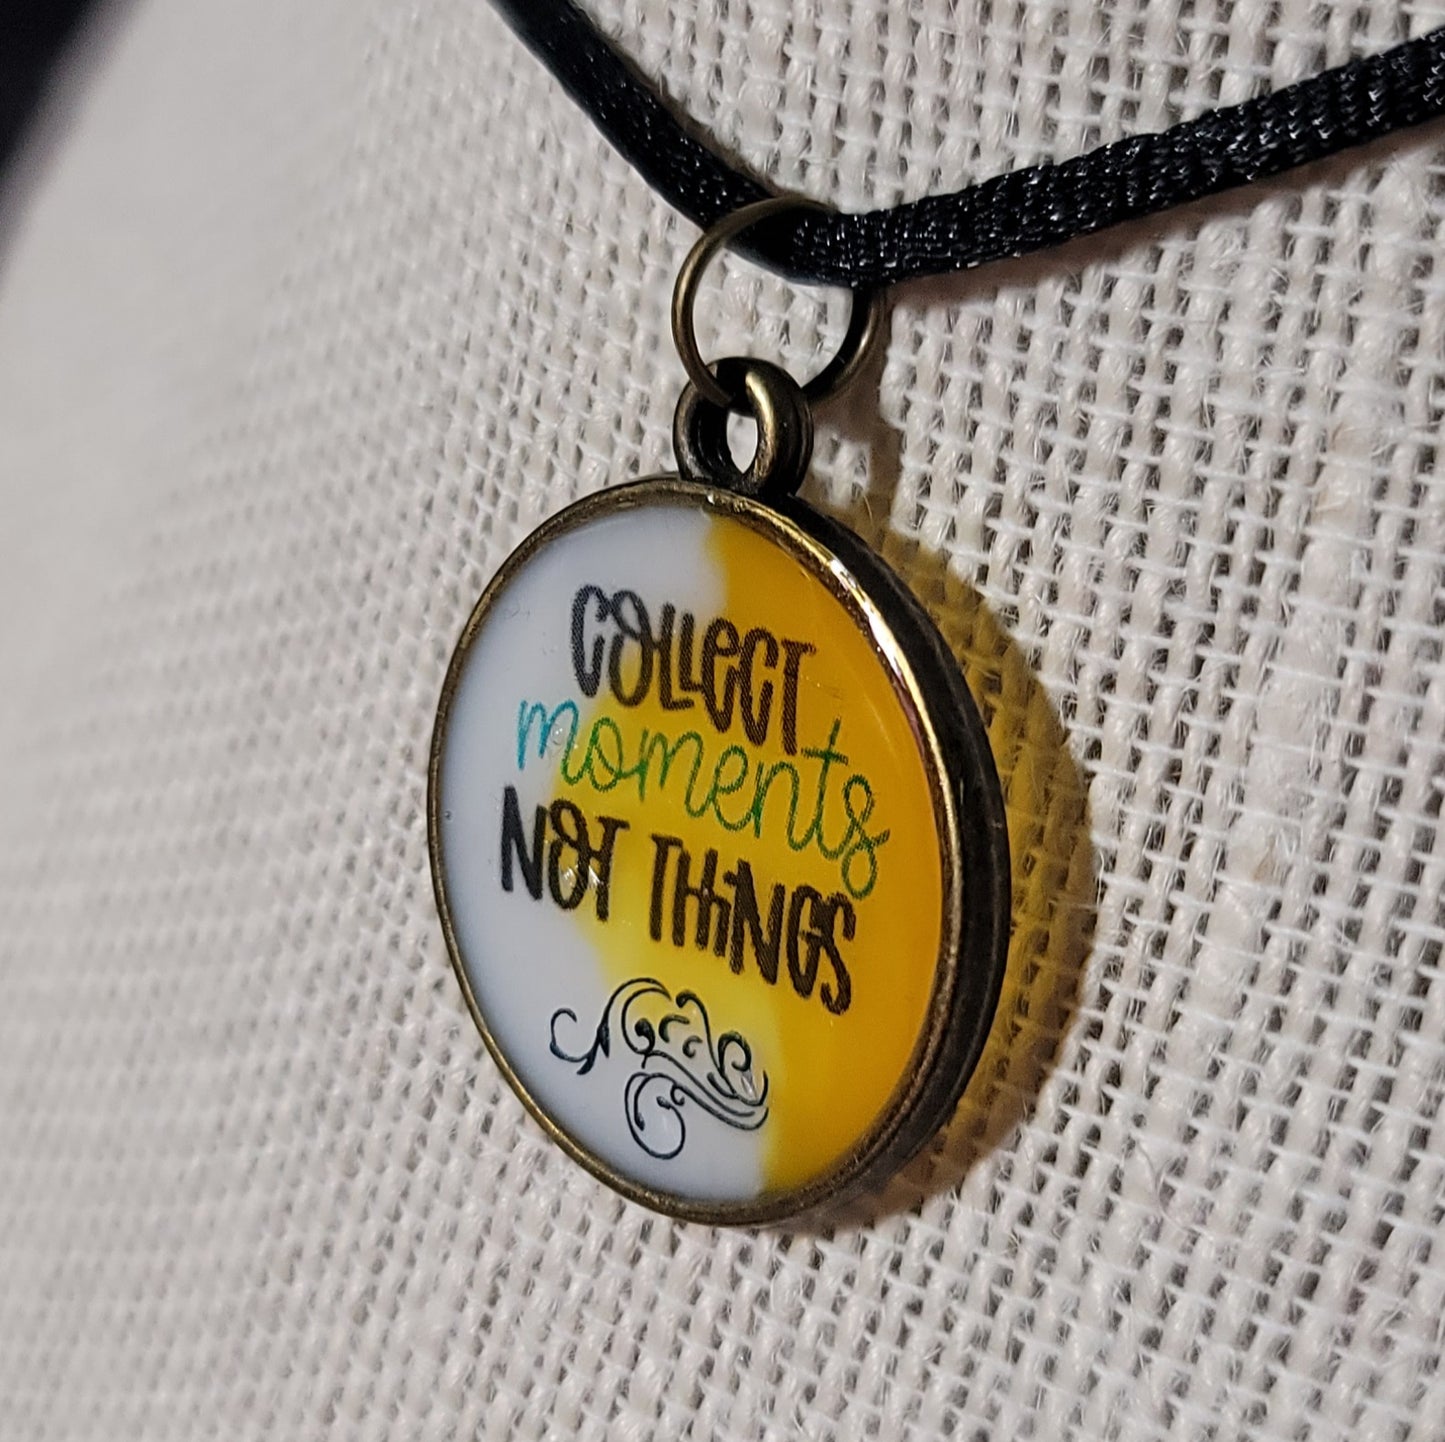 Collect Memories, Not Things Pendant Charm